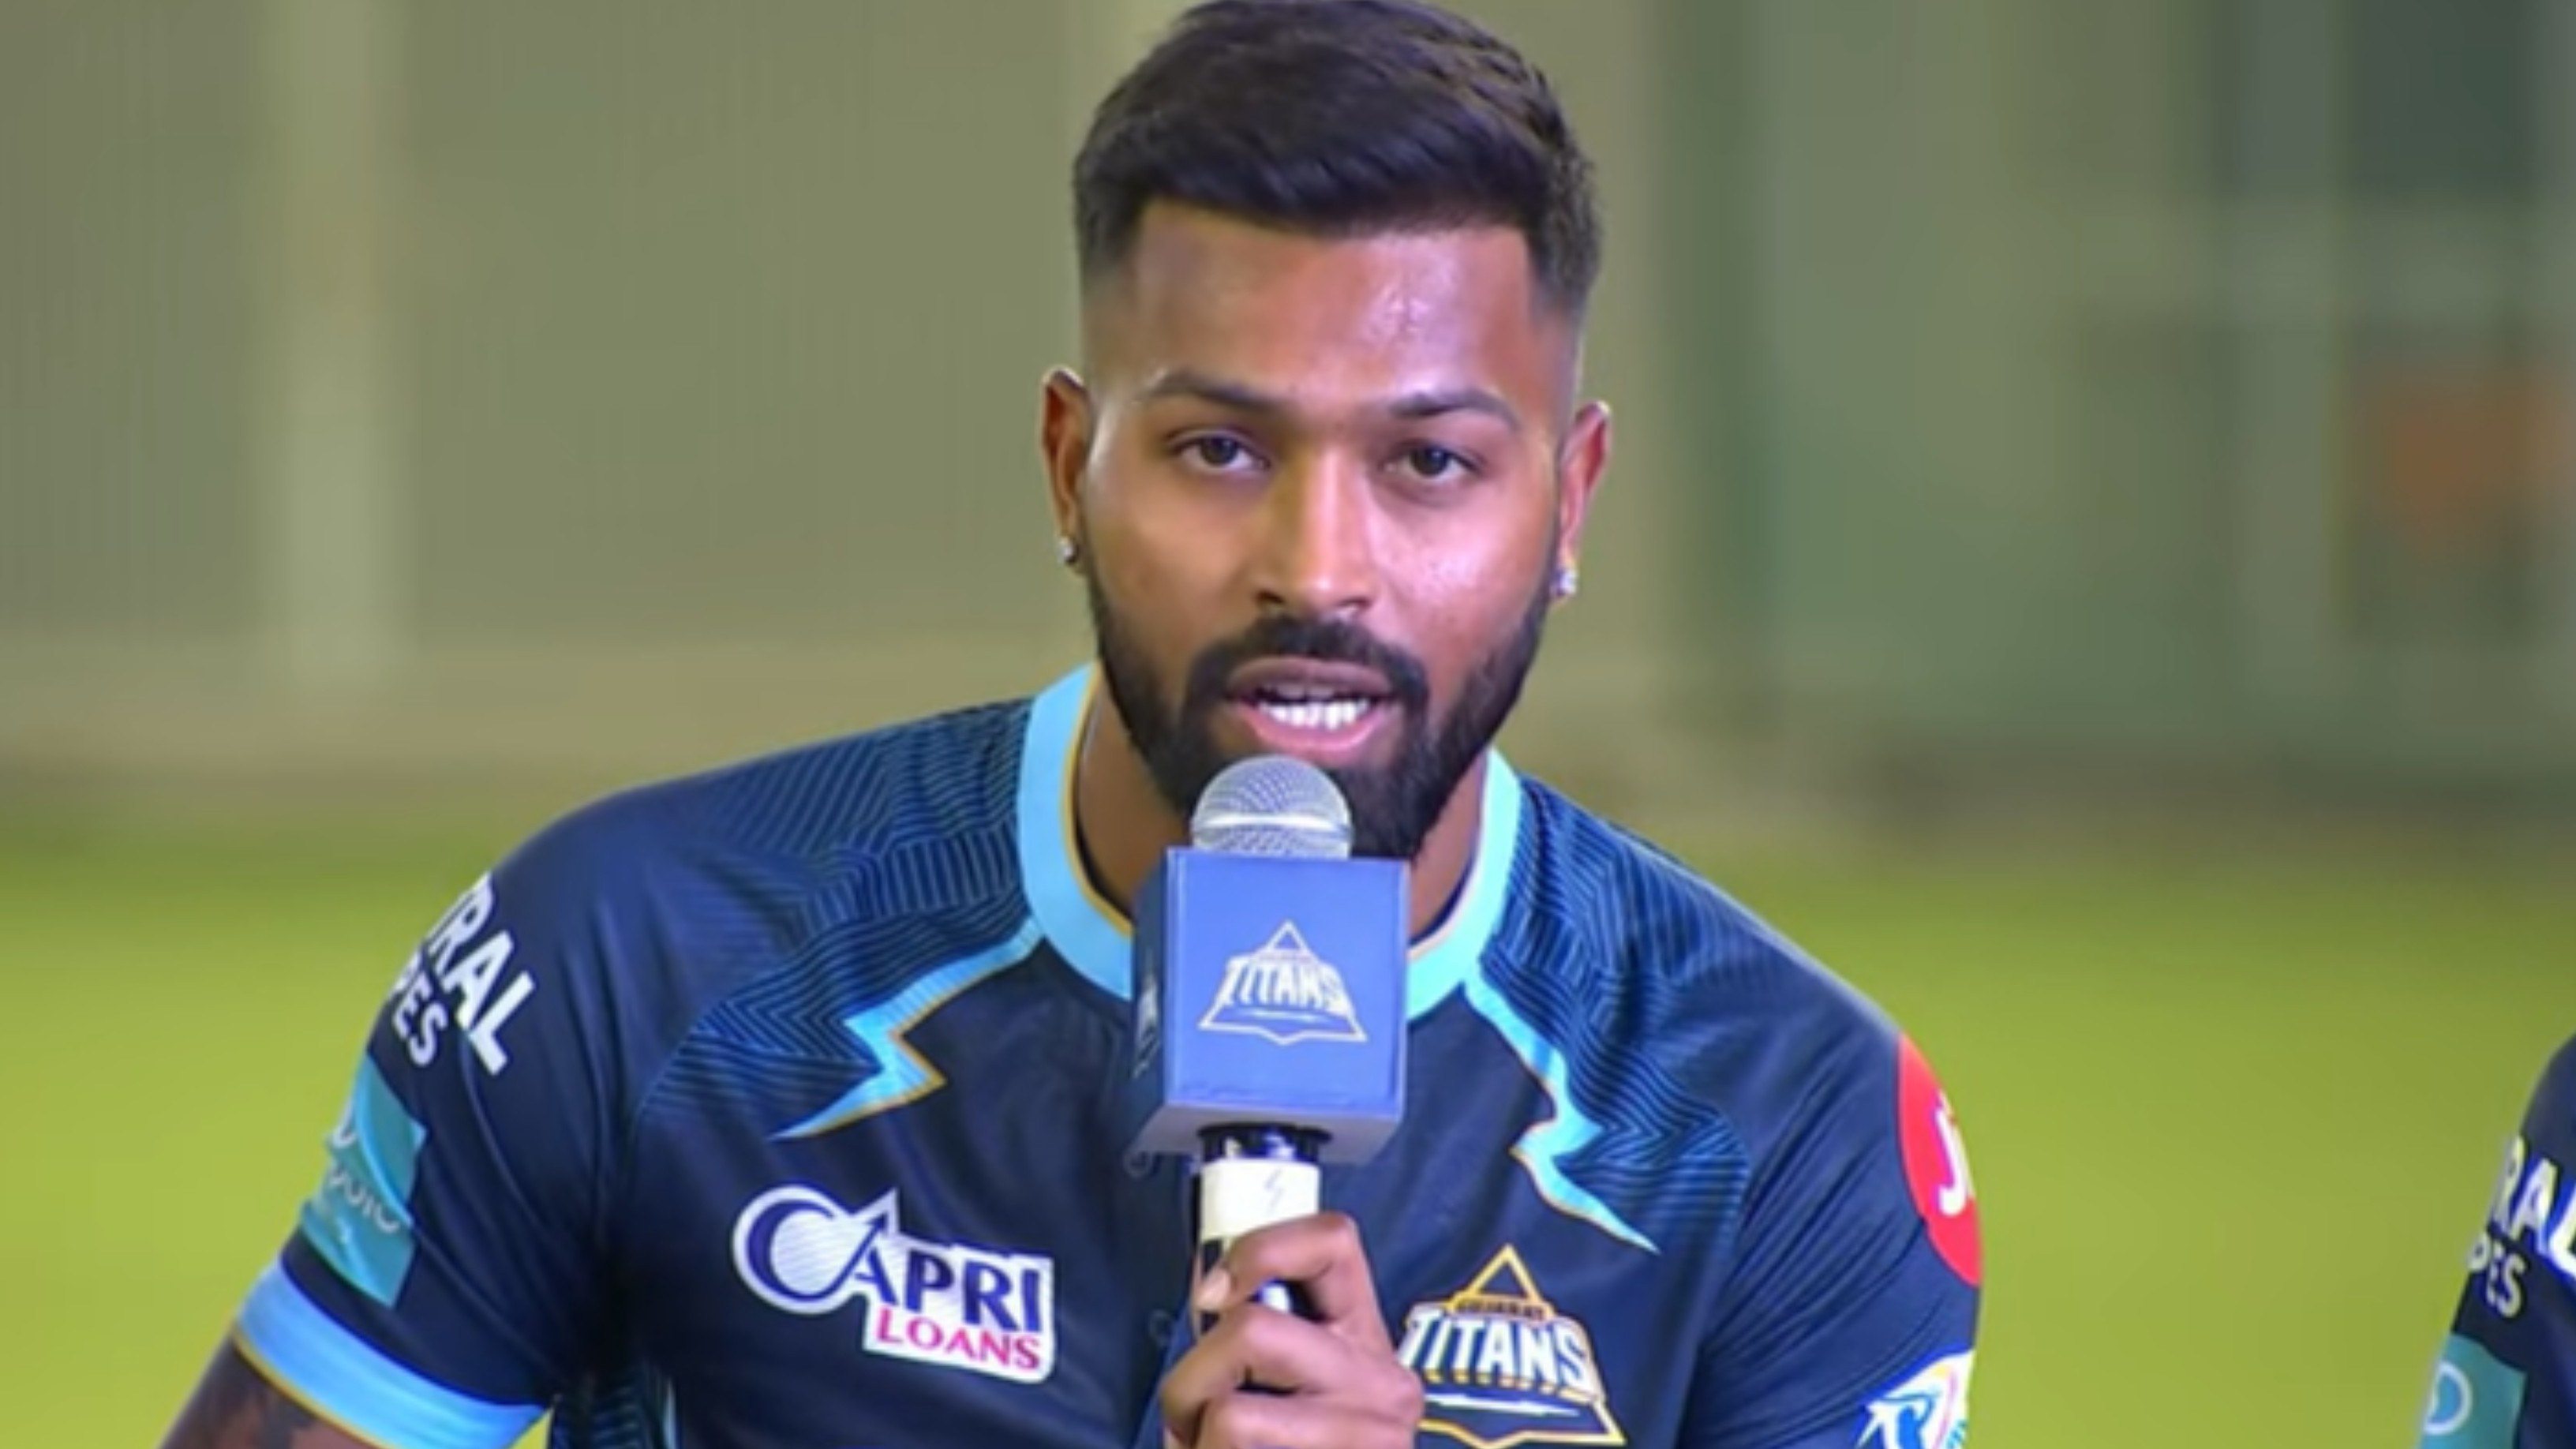 IPL 2022: ‘It would be a surprise’, says Hardik Pandya on his bowling in the upcoming IPL